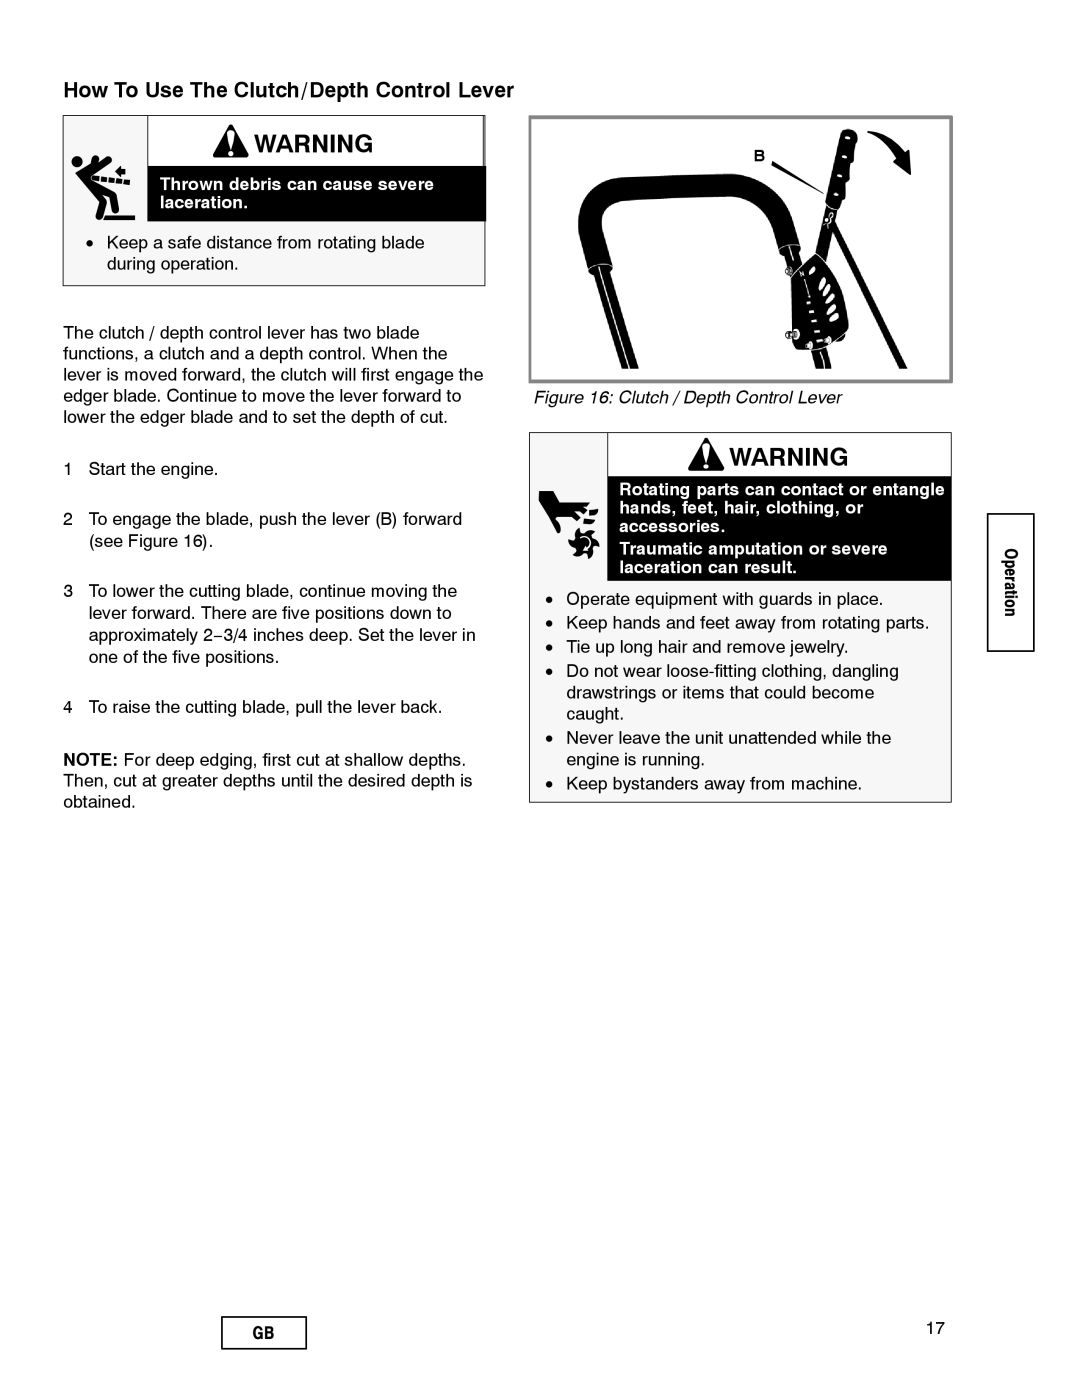 Husqvarna LE389 manual How To Use The Clutch/Depth Control Lever, Thrown debris can cause severe laceration 